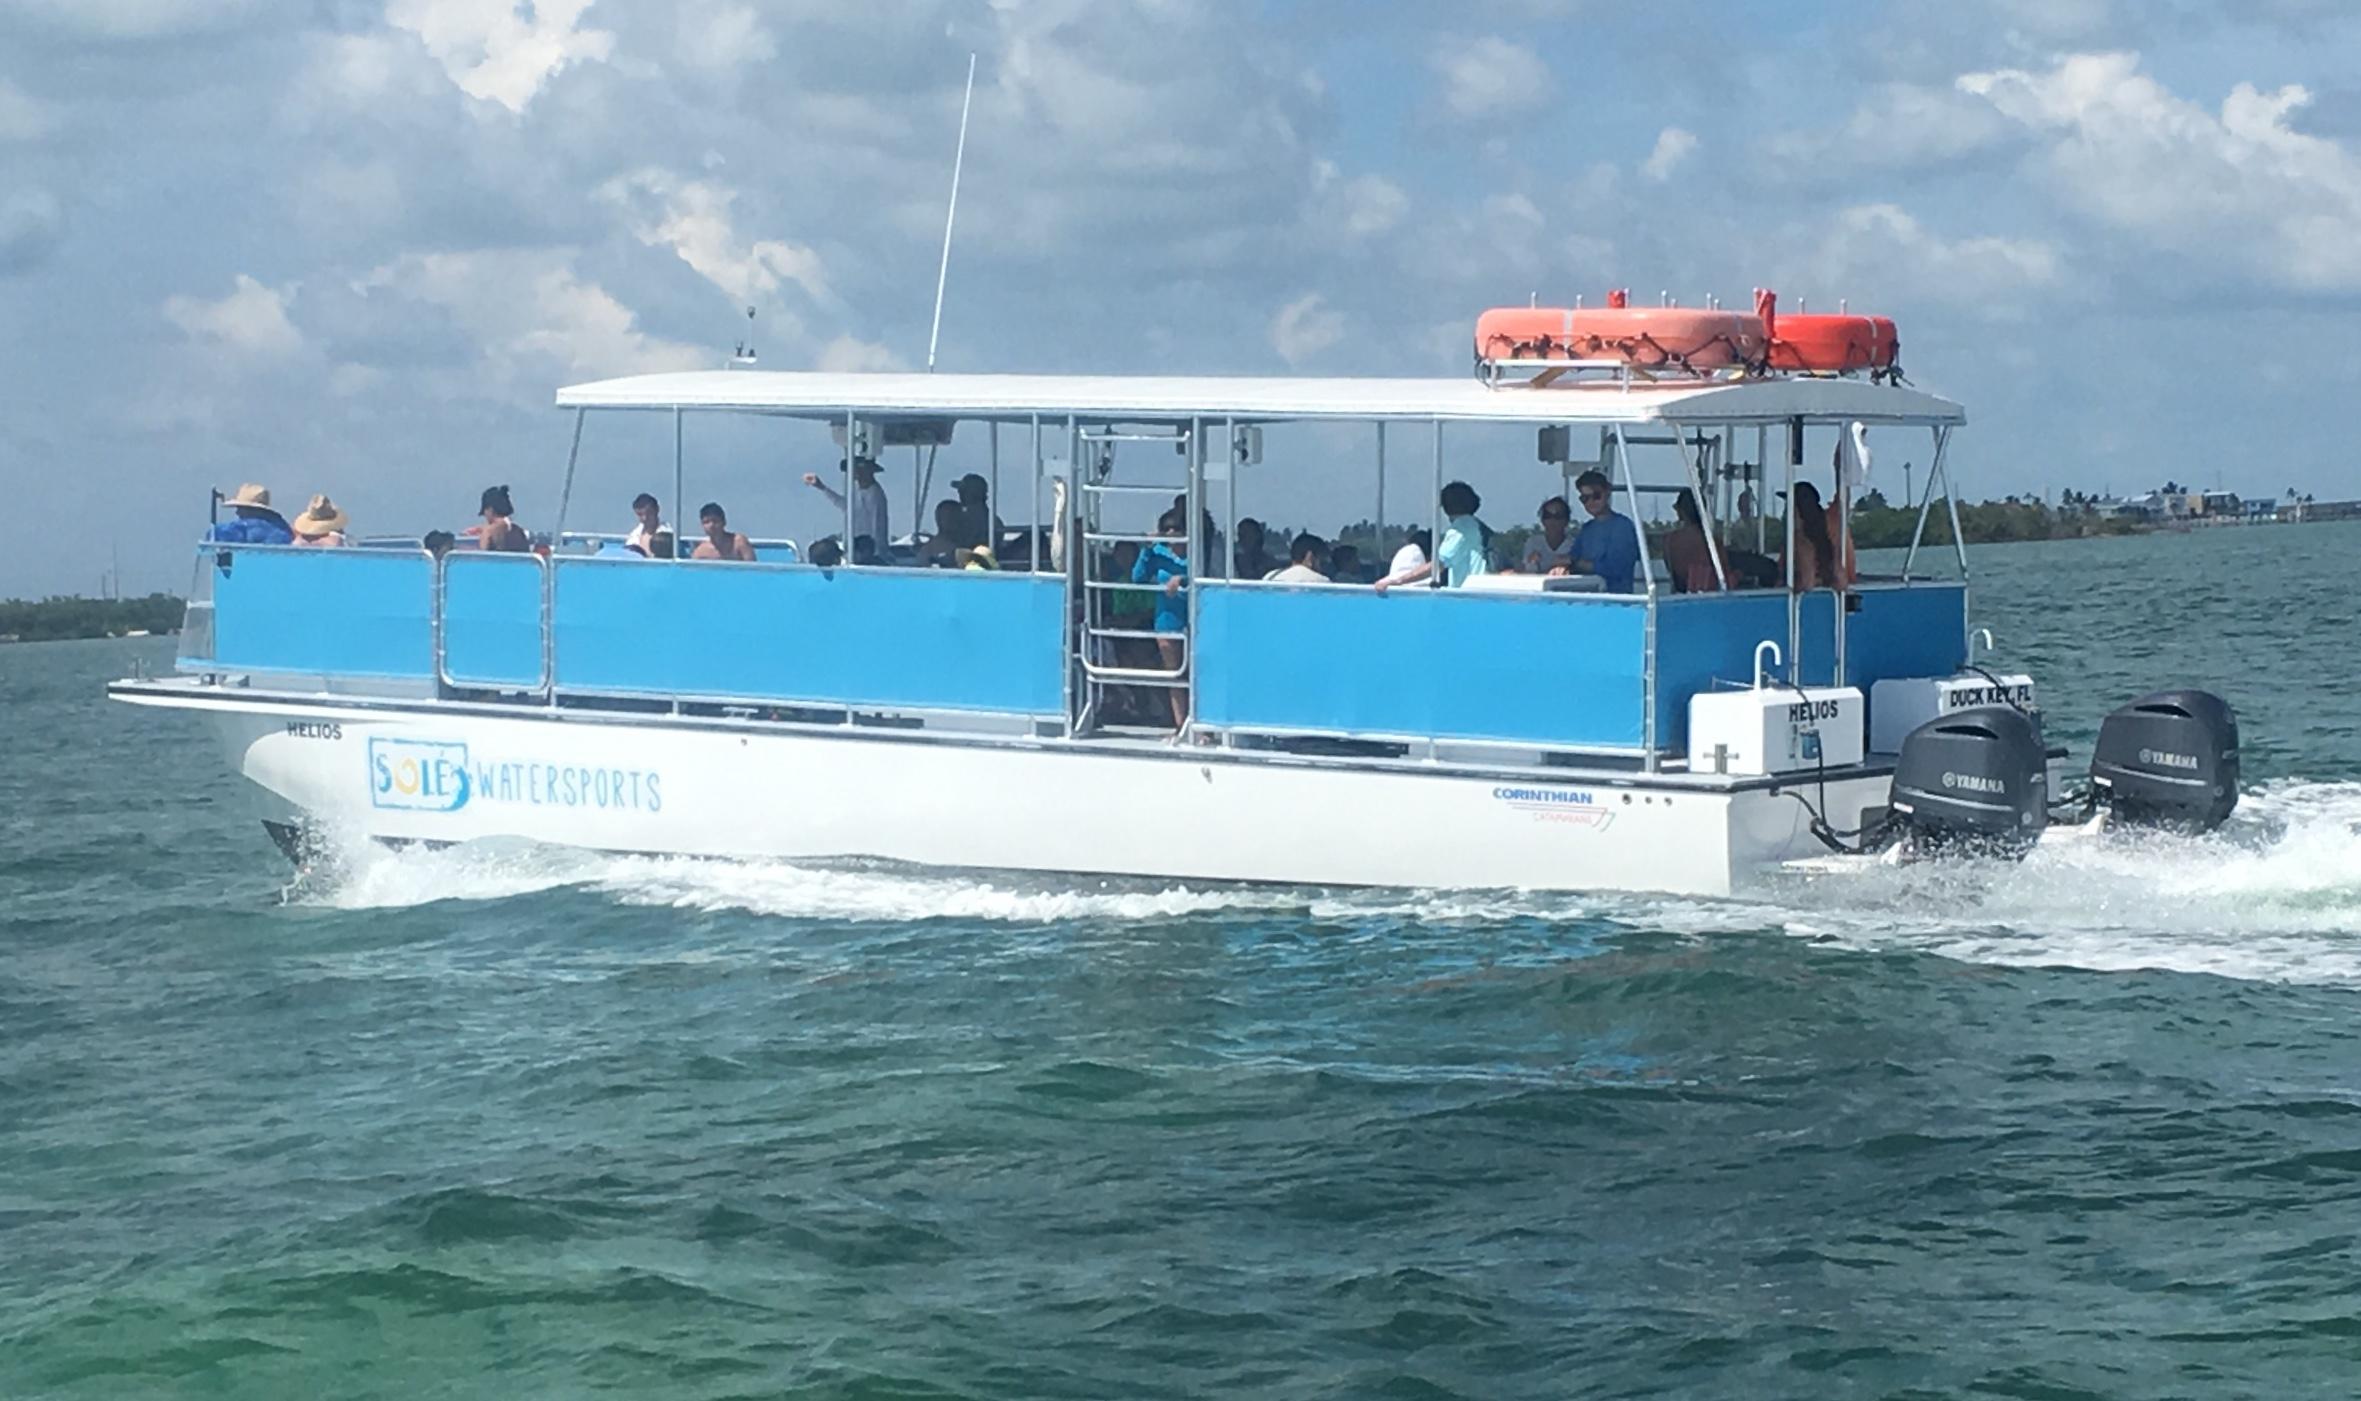 Half Day Snorkeling Tour in Duck Key